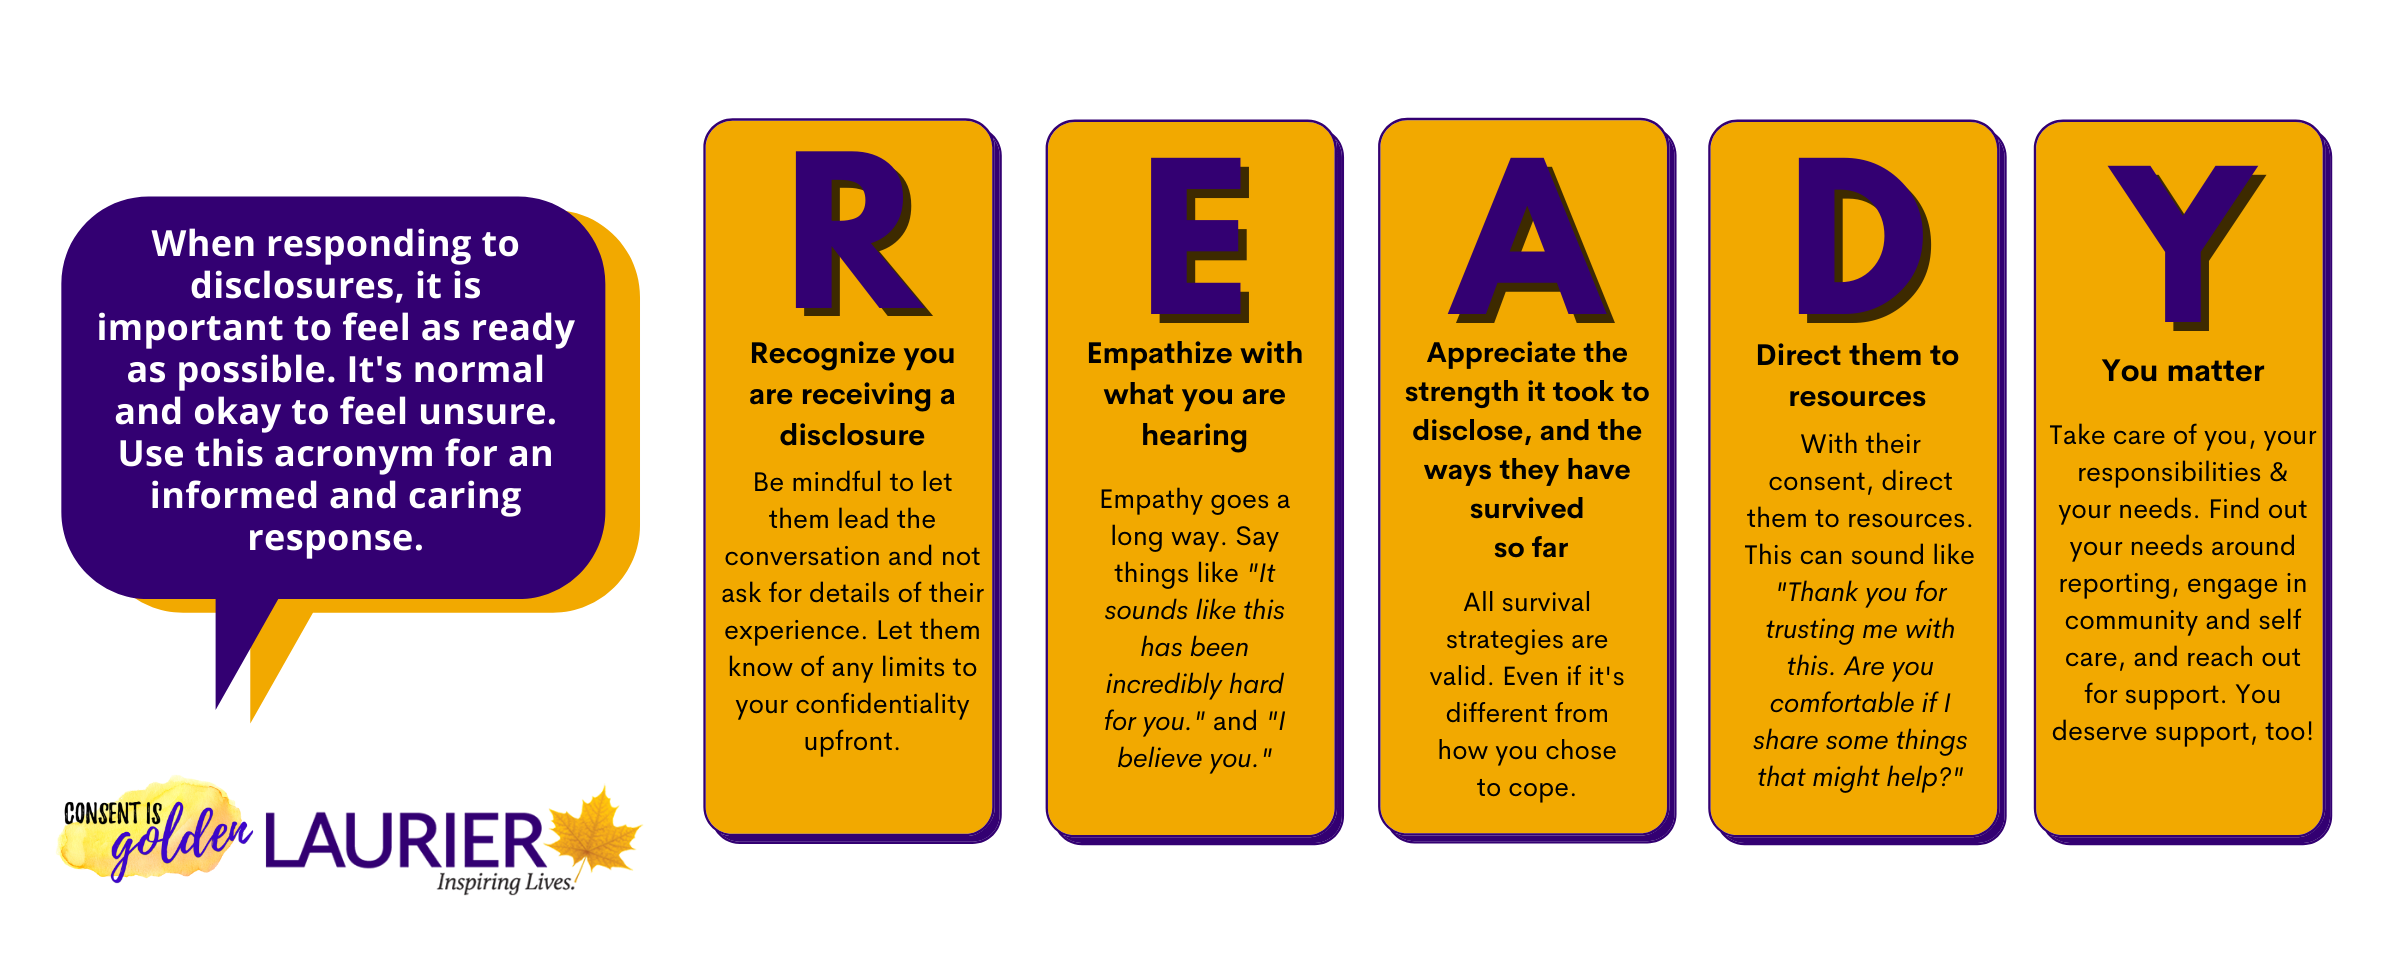 When responding to disclosures, it is important to feel as ready as possible. It's normal and okay to feel unsure. Use this acronym for an informed and caring response. 